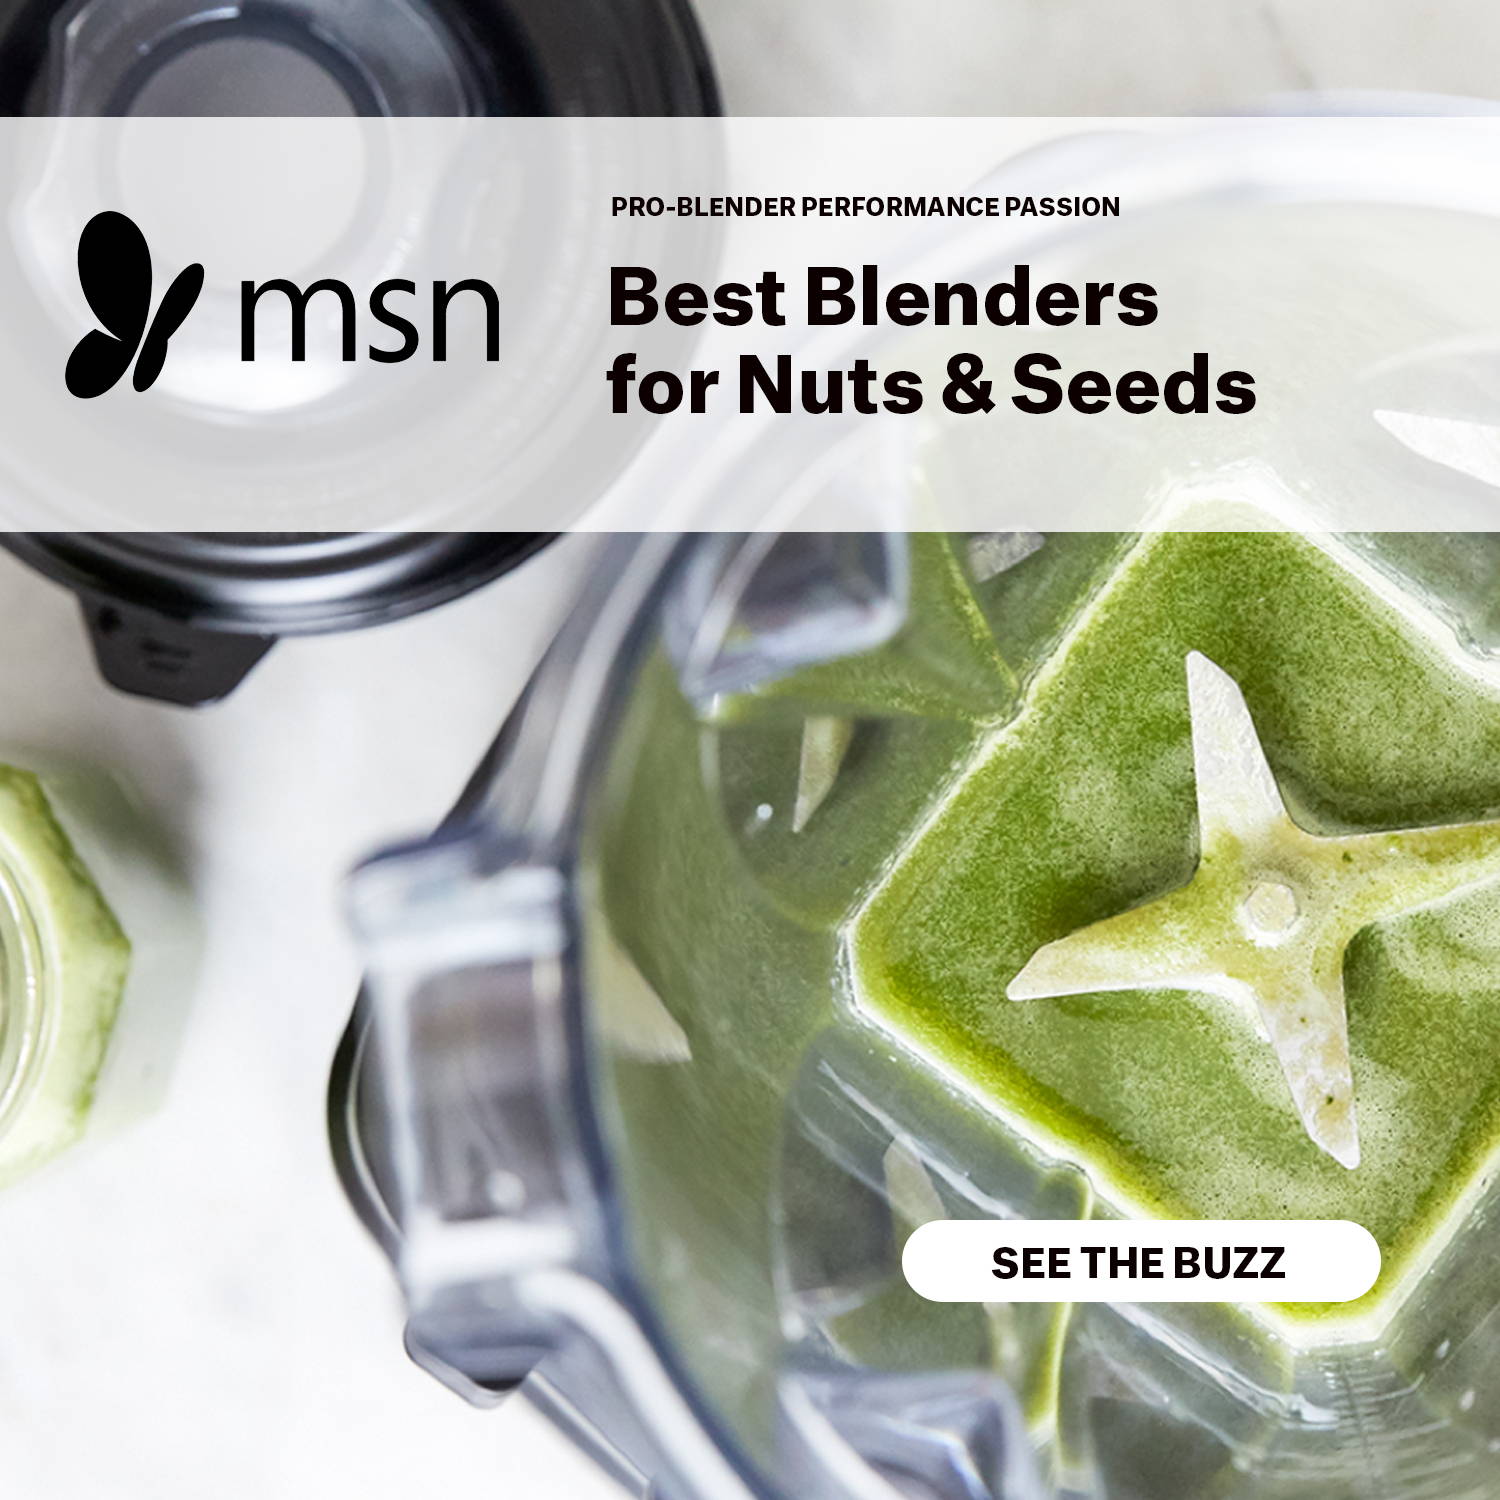 MSN Best Blenders for Nuts & Seeds. Pro-Blender performance passion. See the buzz.